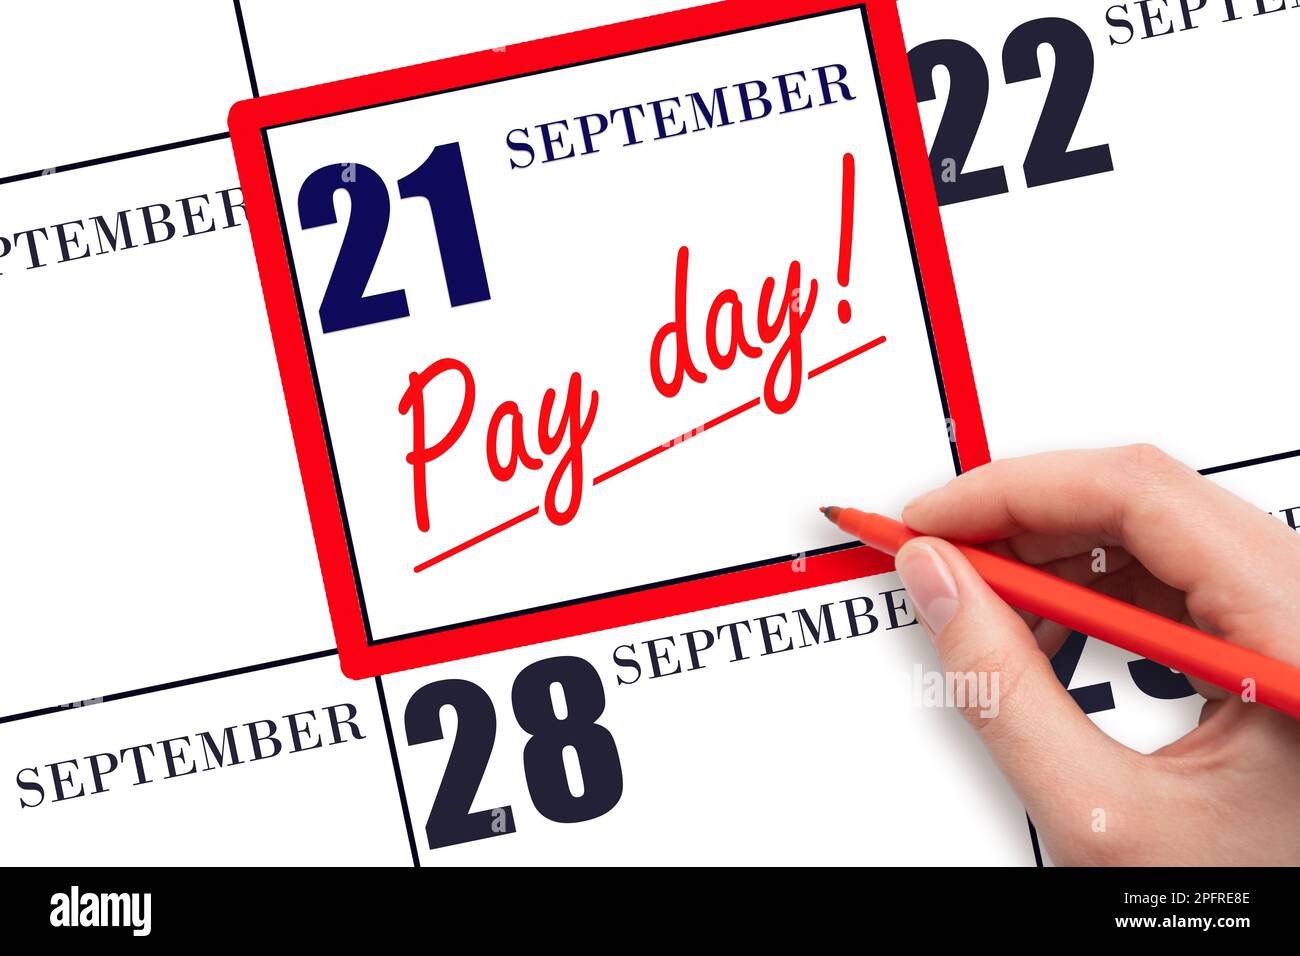 21st day of September. Hand writing text PAY DATE on calendar date September  21 and underline it. Payment due date.  Reminder concept of payment. Aut Stock Photo